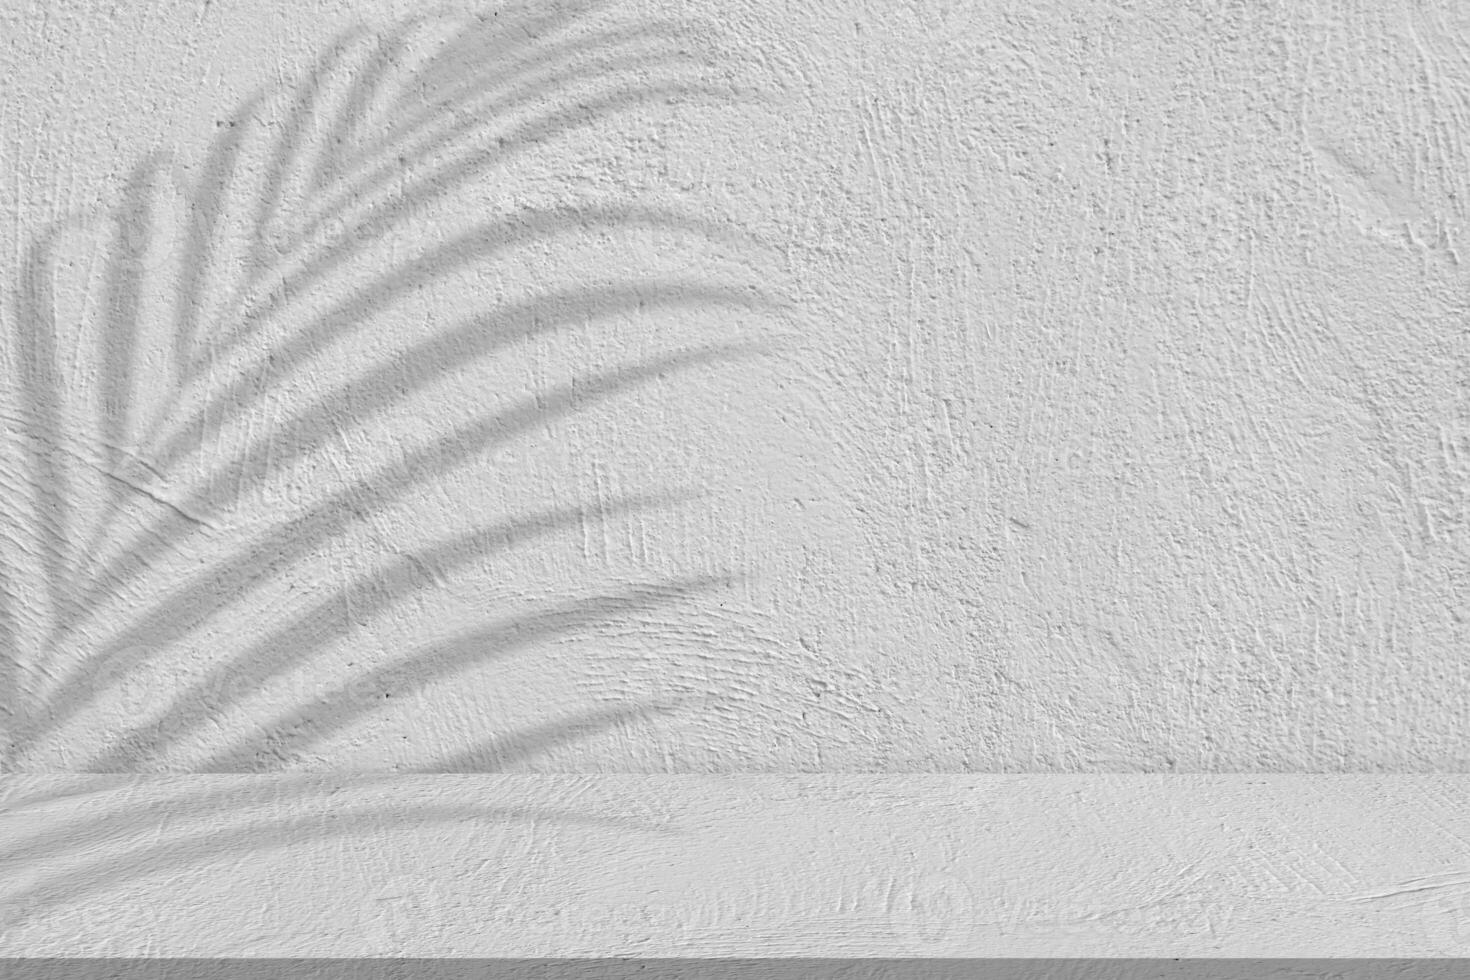 Background White Wall Studio with palm leaves Shadow, light on Cement floor Surface Texture,Empty Grey Concrete Room with Podium DisplayTop Shelf Bar,Empty Backdrop for Summer product sale,Present photo